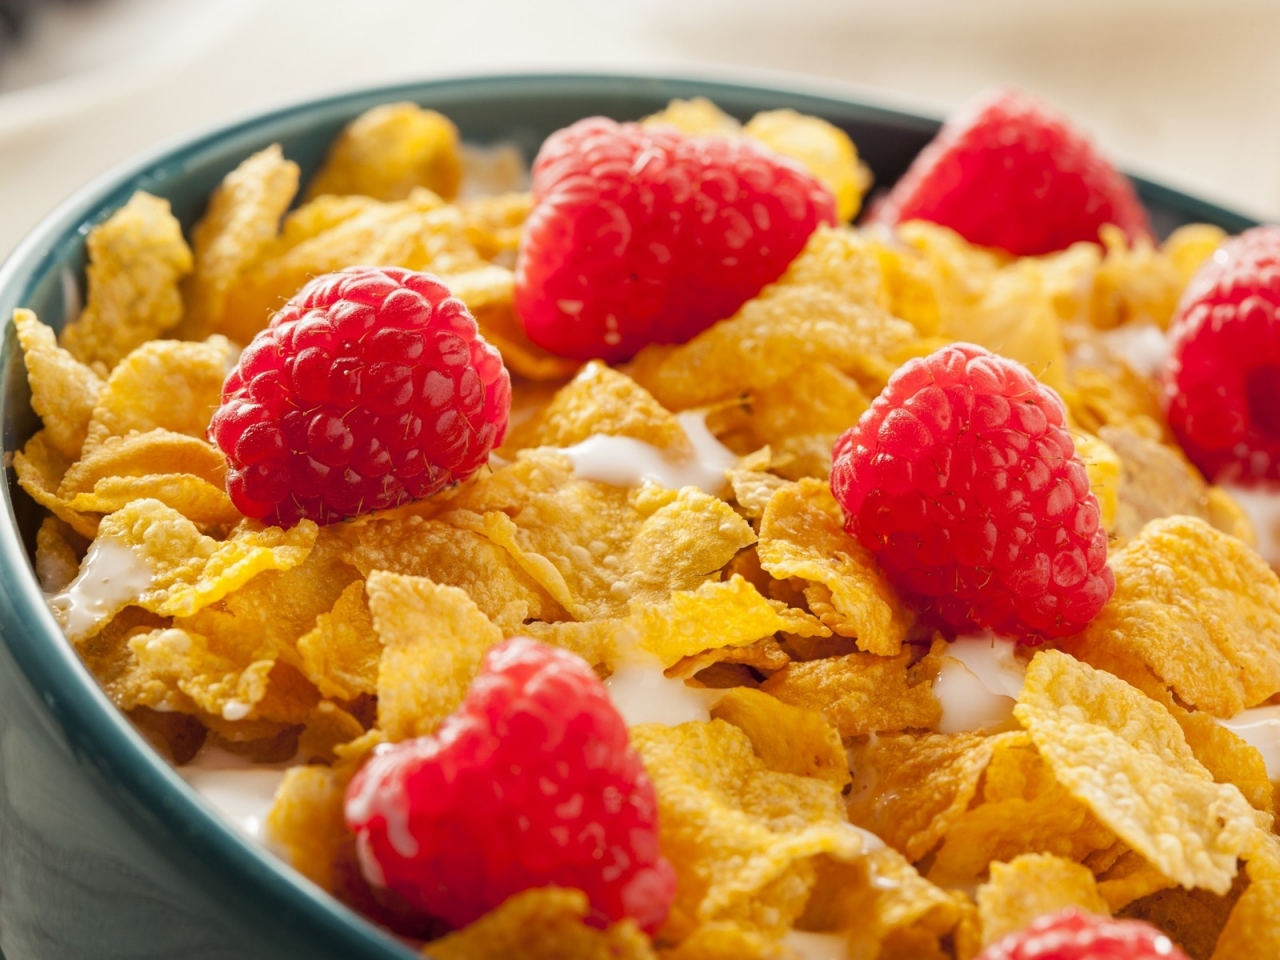 Cereals with Raspberries  for 1280 x 960 resolution